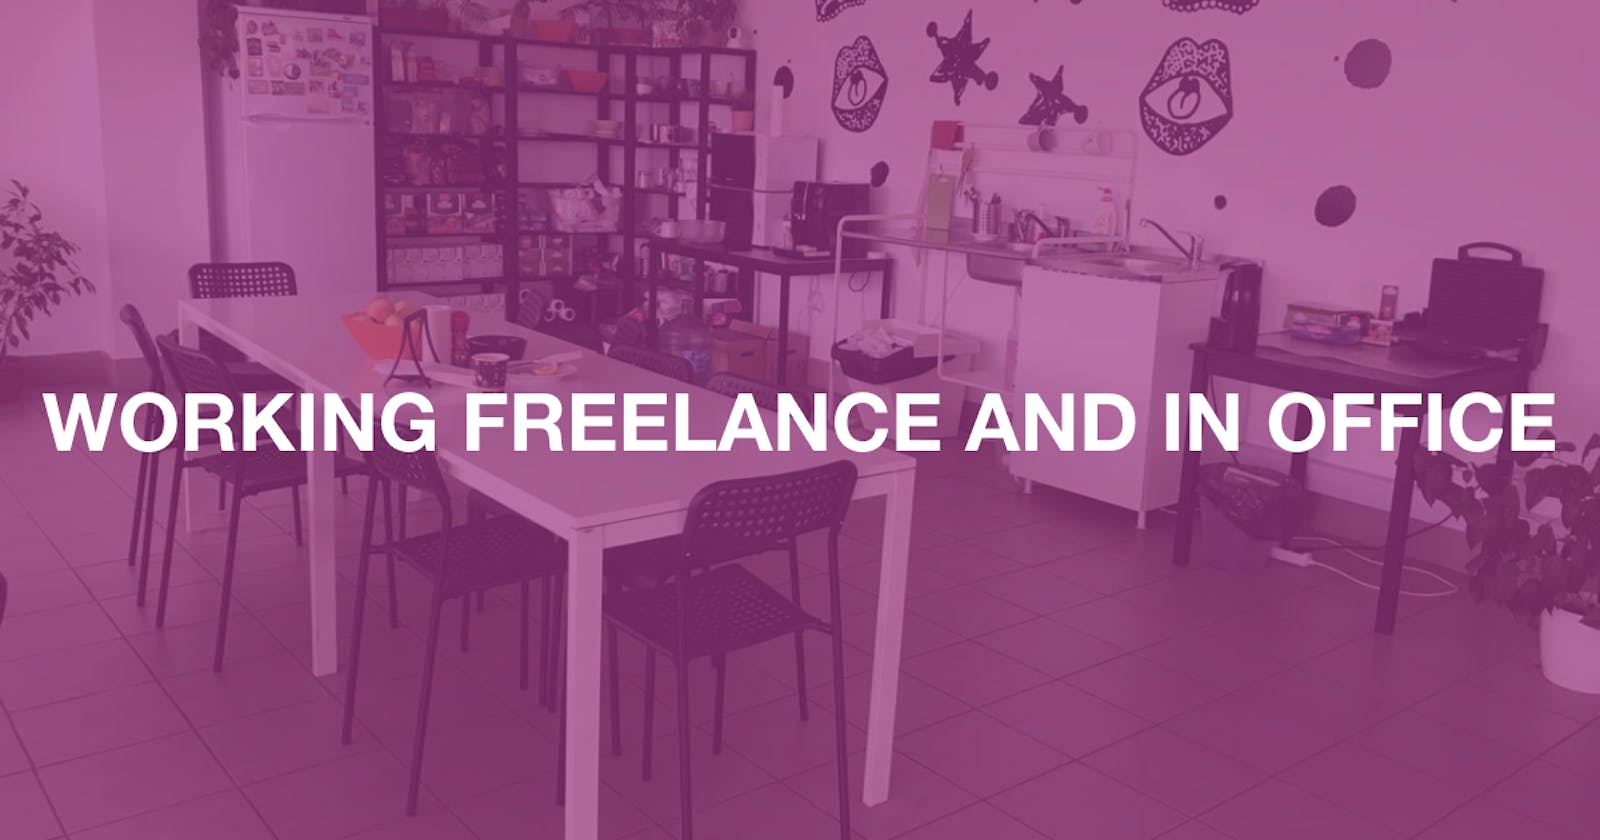 Being a freelancer or an office worker?